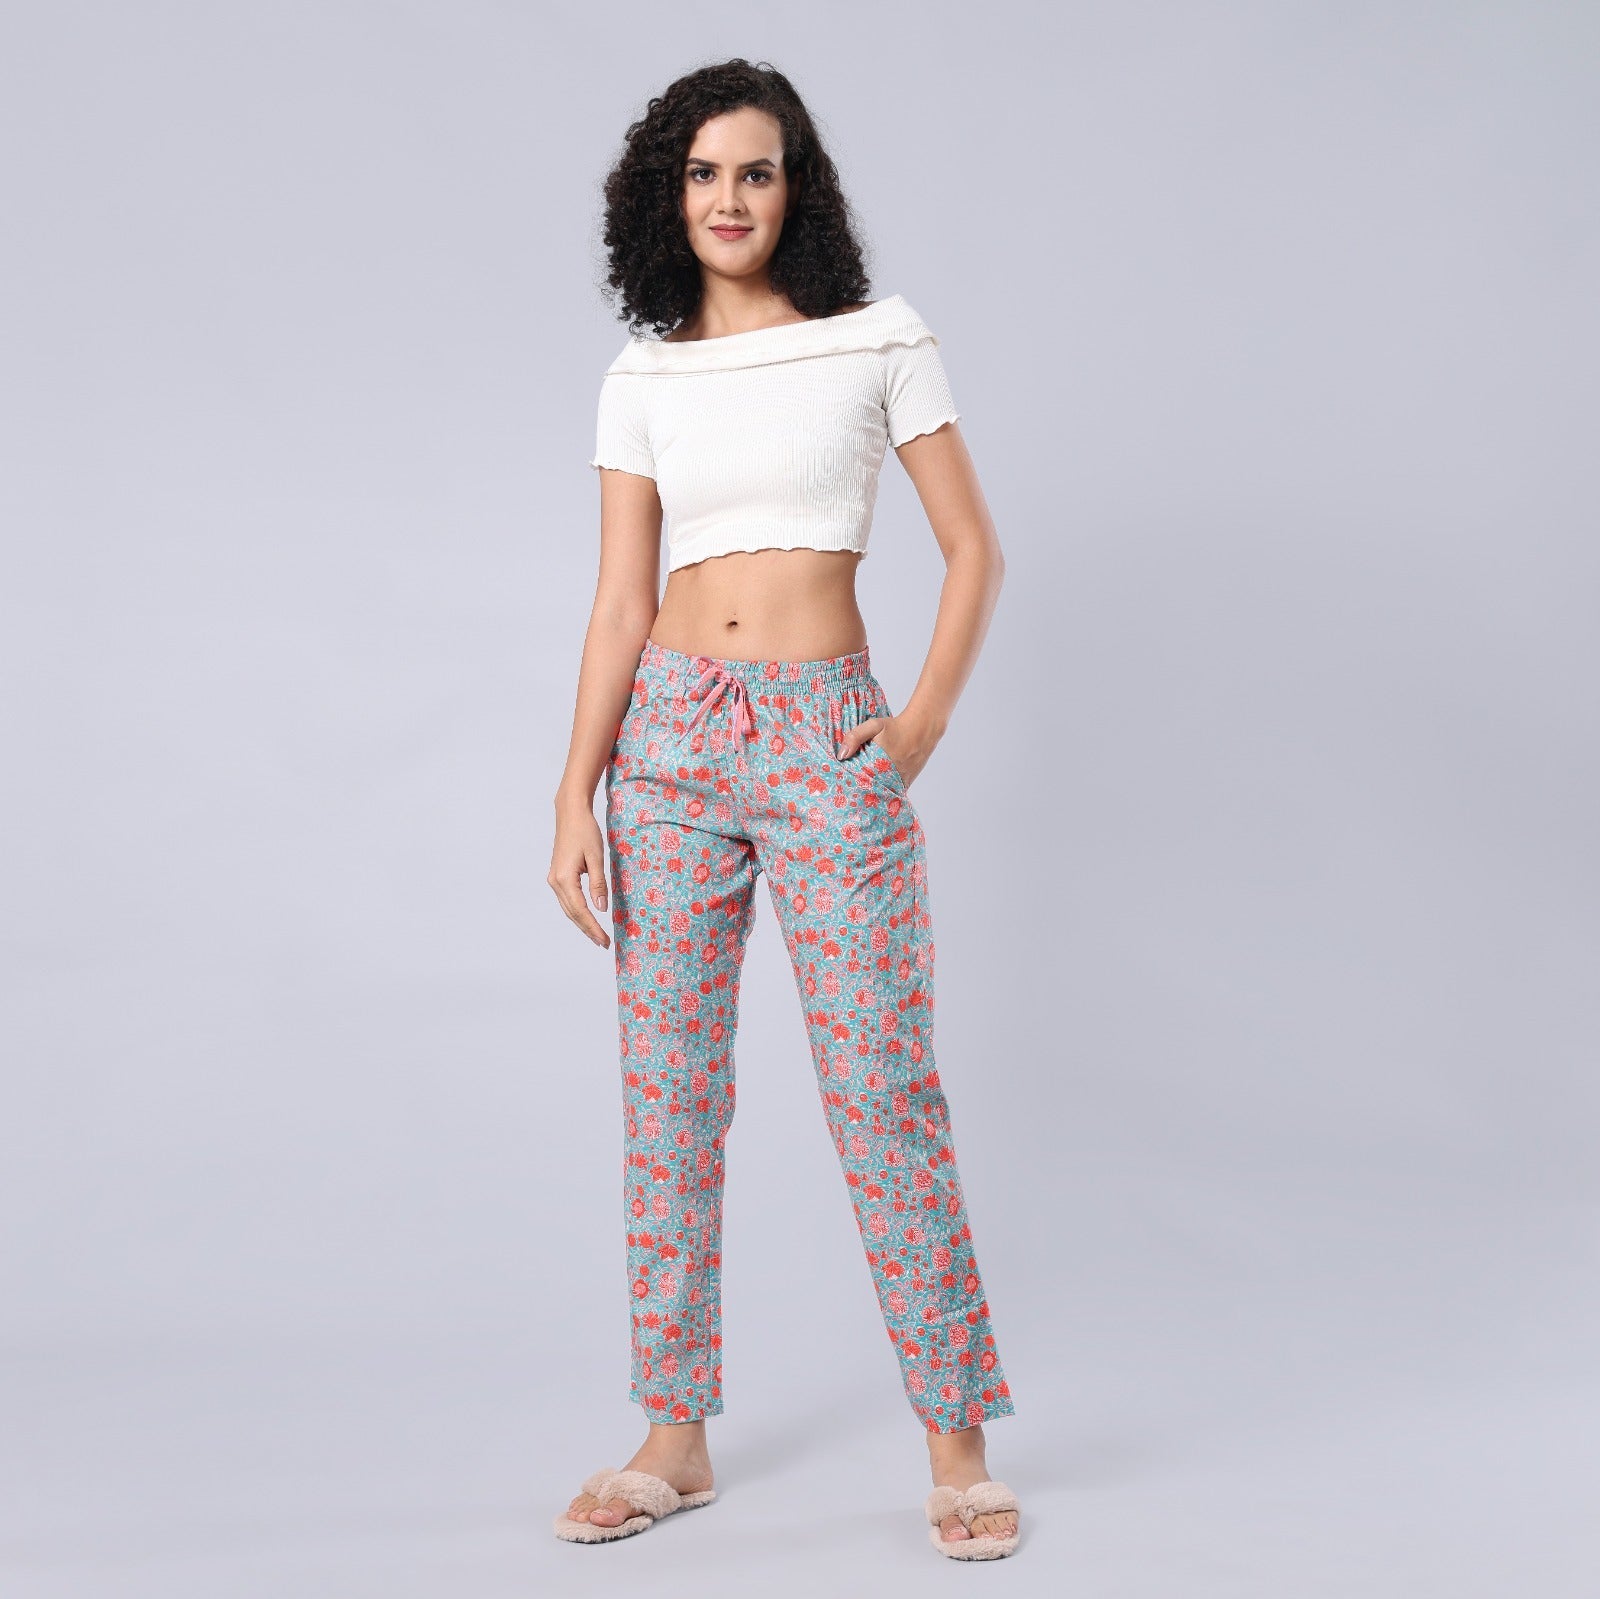 Evolove launches world's softest and most comfortable pajamas in